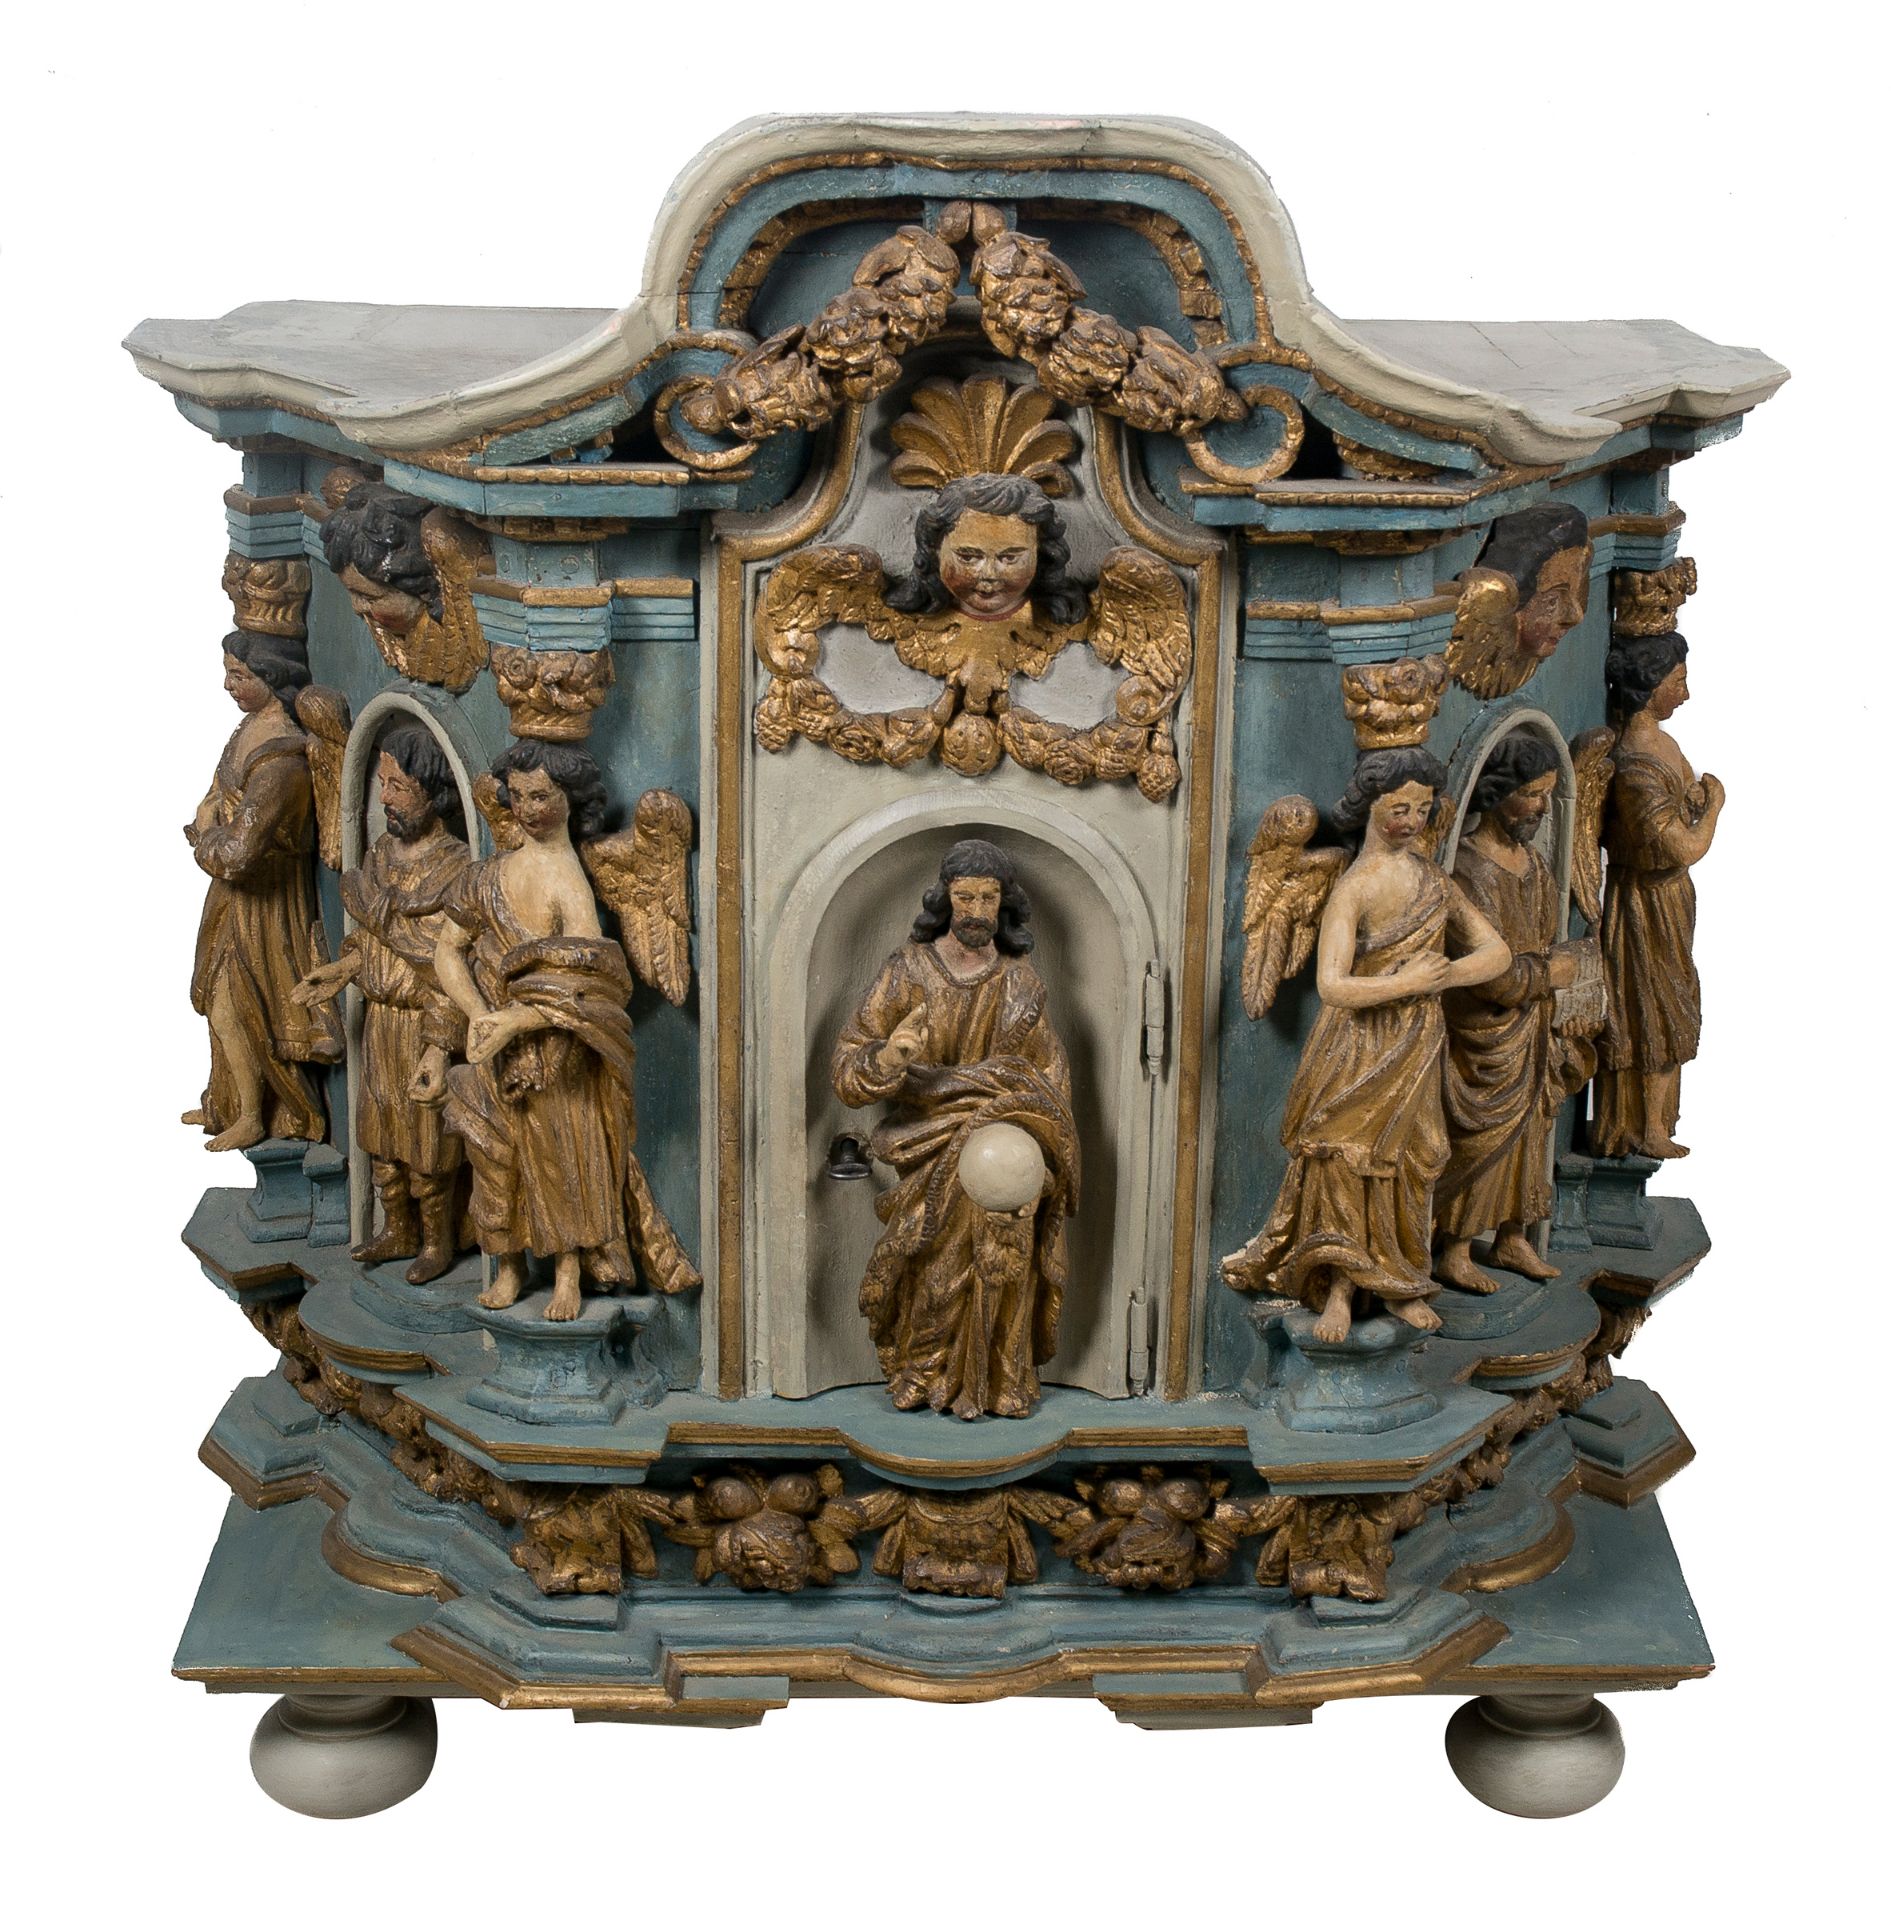 Carved, gilded and polychromed wooden tabernacle. Baroque. 17th century.